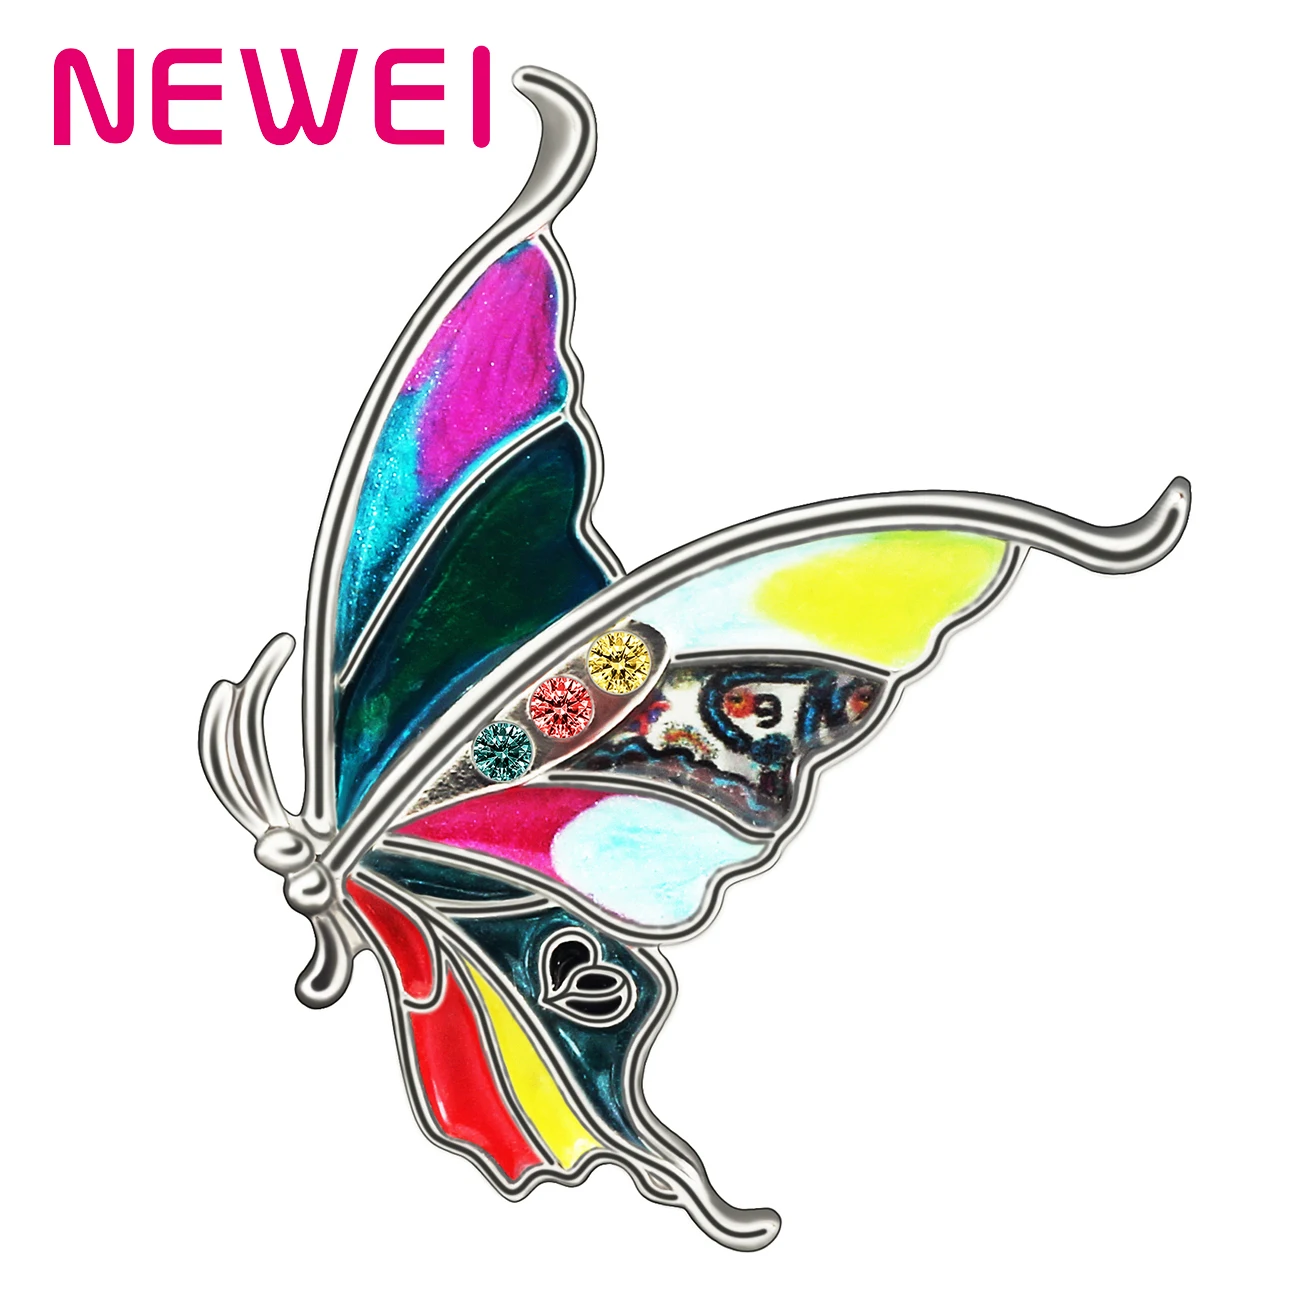 

NEWEI Spring Enamel Alloy Mental Floral Swallowtail Butterfly Brooches Fashion Pin Jewelry For Women Teens Girls Charms Gifts